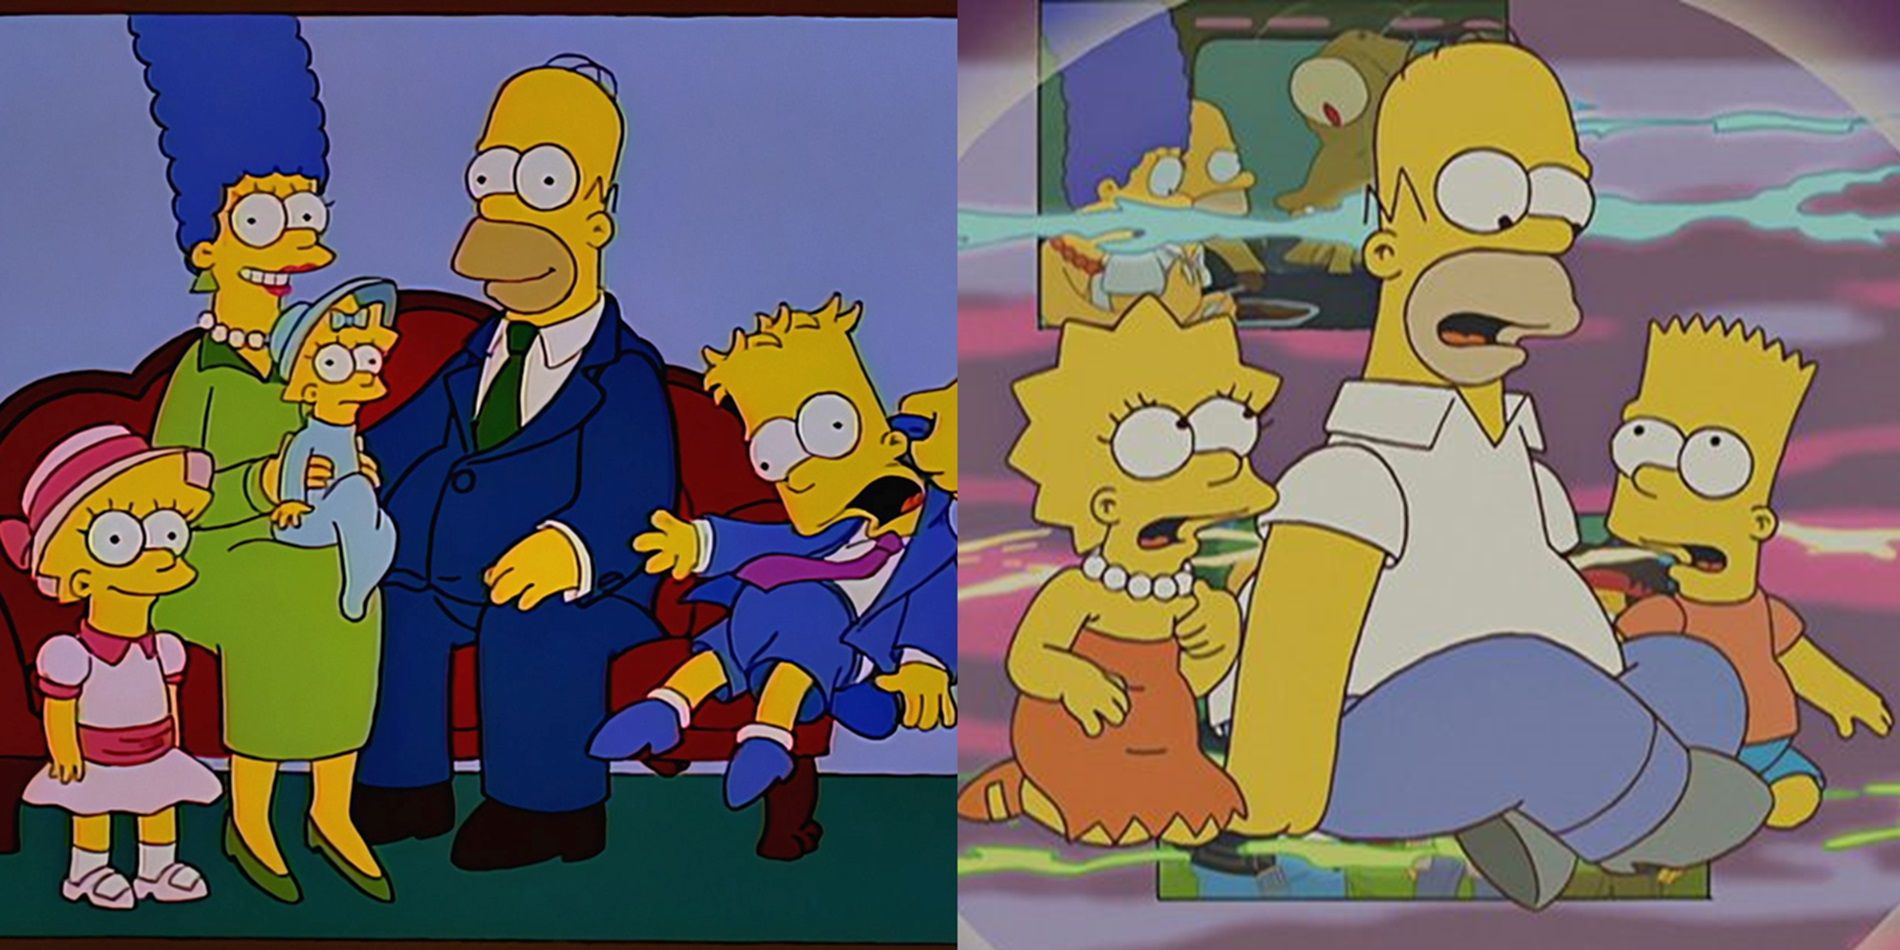 Movies and Musings: The 10 Darkest Episodes of The Simpsons